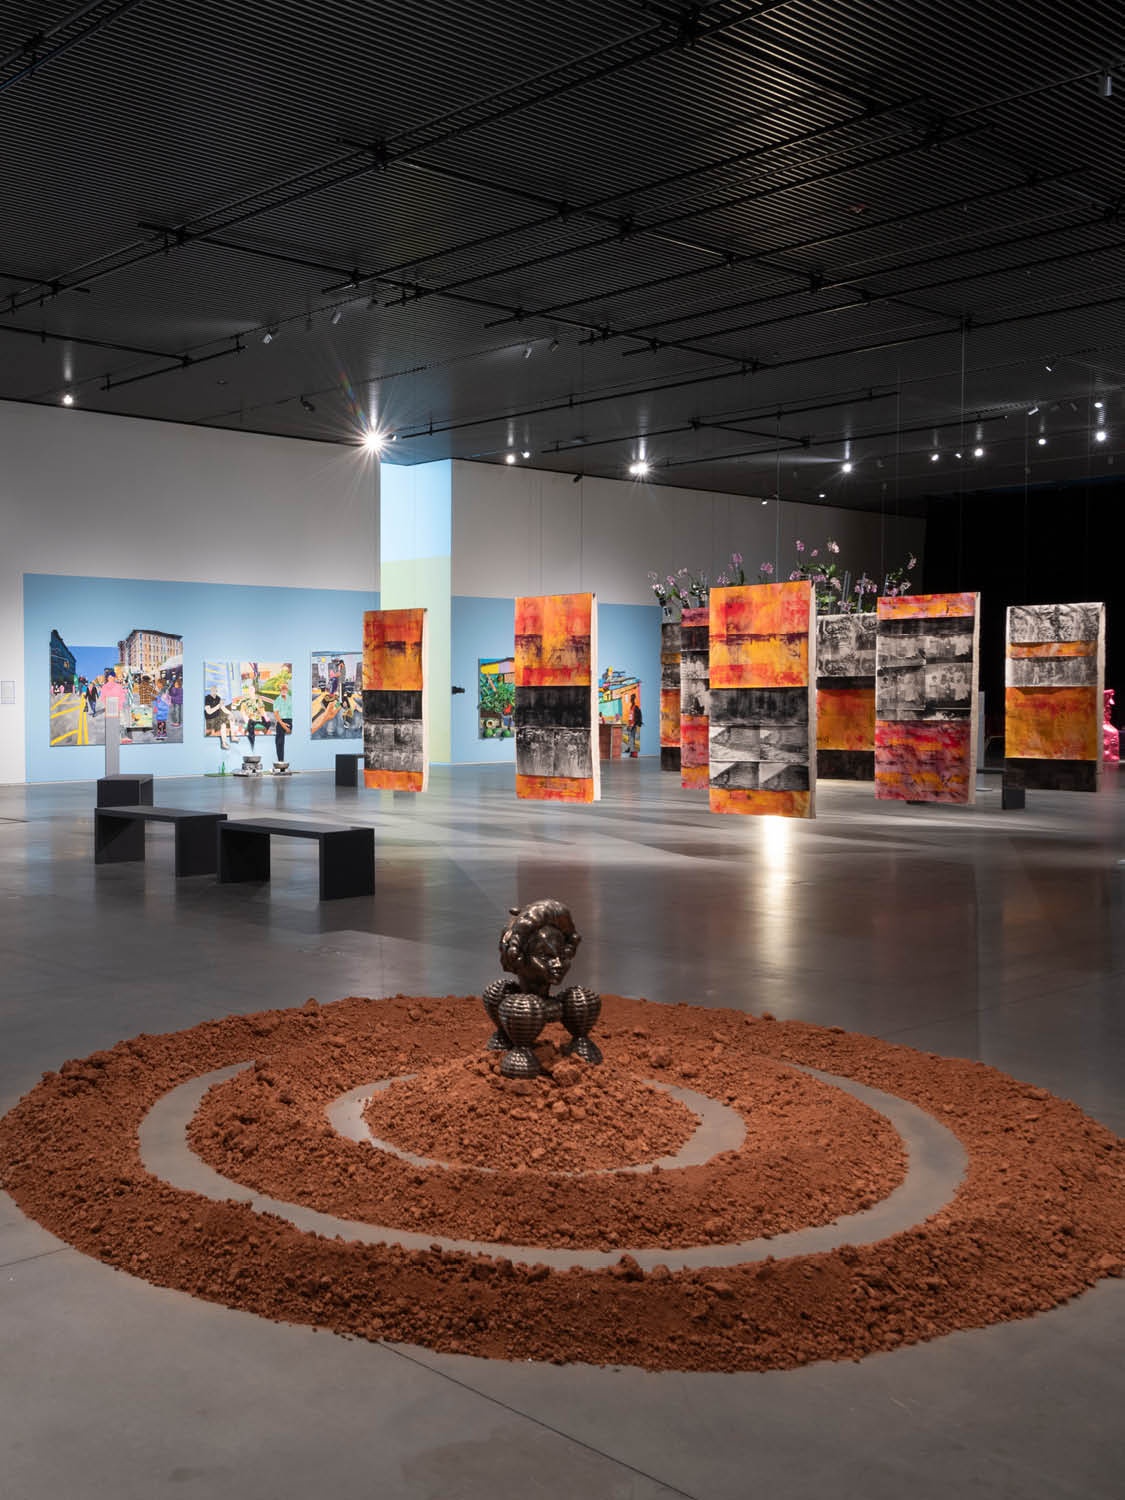 A view of an exhibition in a large art gallery without any walls. In the foreground is an artwork on the floor that consists of three concentric rings of red dirt. At the center sits a bronze sculpture inspired by the Benin Bronzes, historical artworks from Benin, present-day Nigeria. In the background are other paintings and installations. In the background are various paintings hanging from the ceiling and walls.